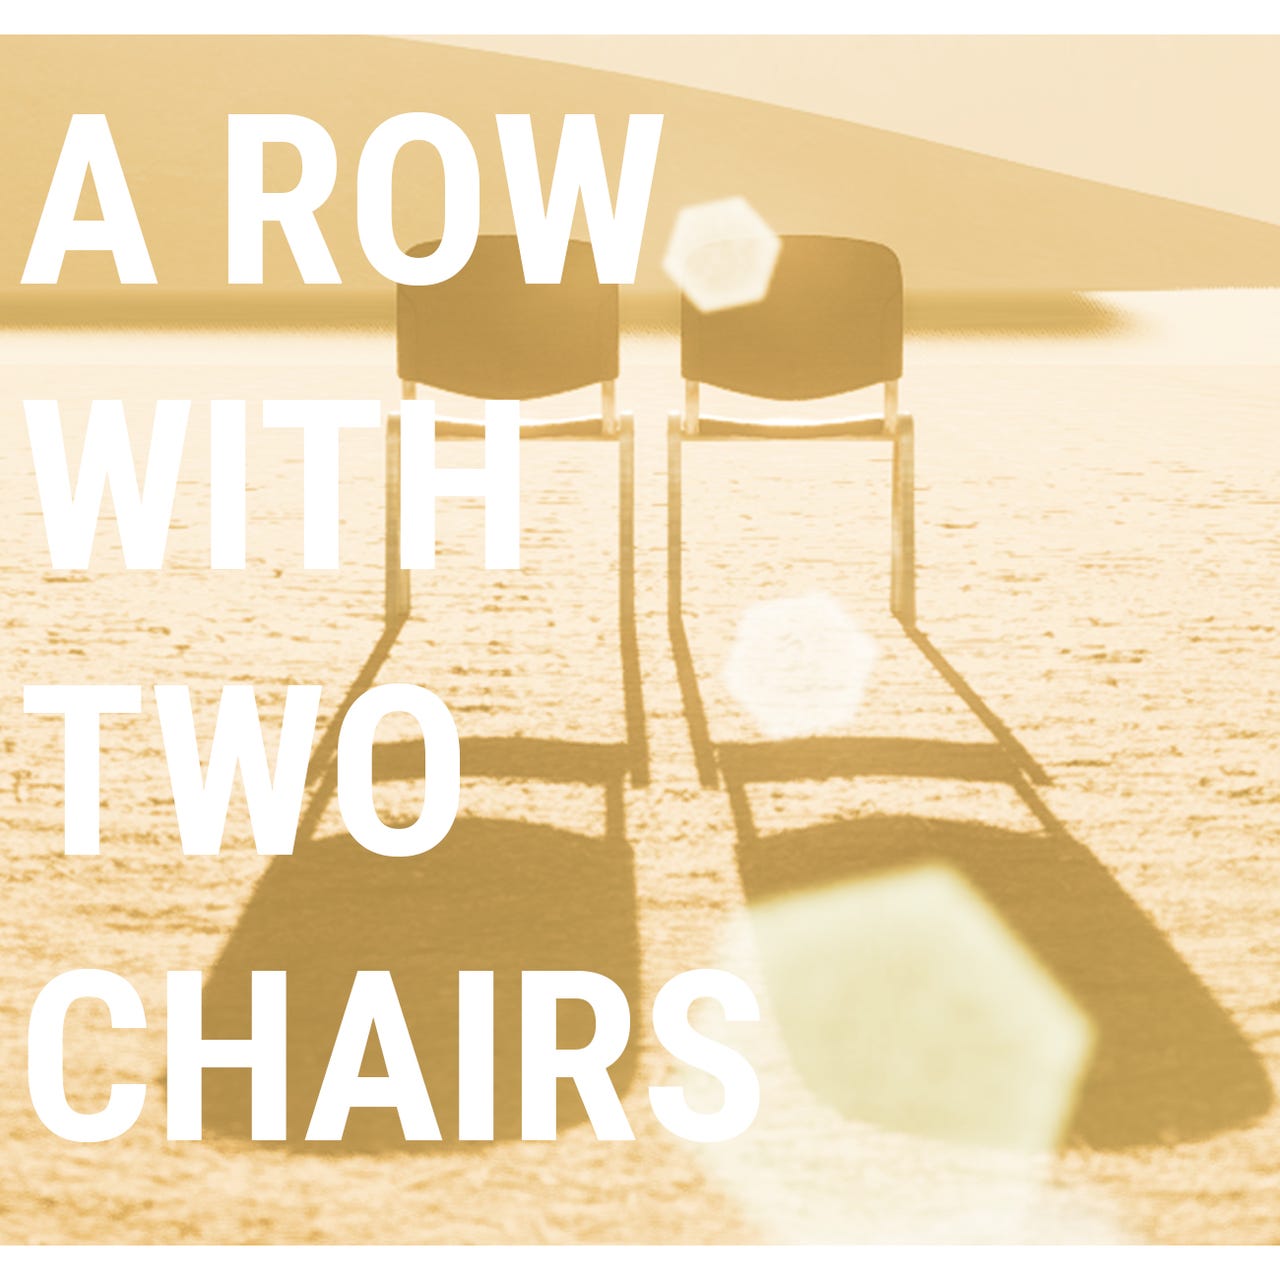 A Row With Two Chairs: The Substack